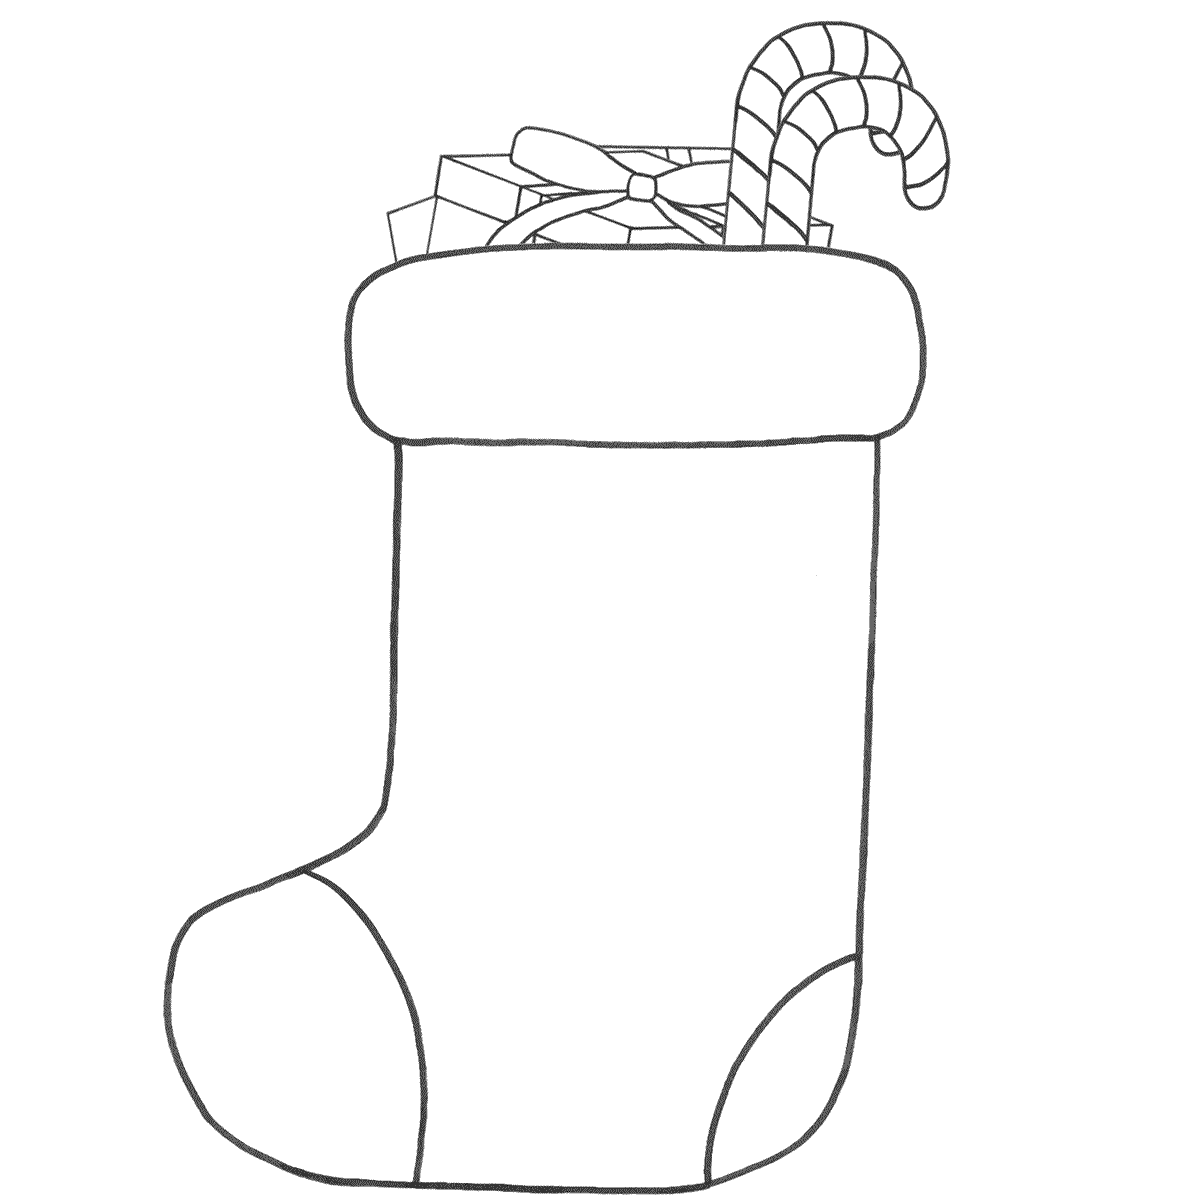 Christmas stocking coloring pages Coloring Pages & Pictures